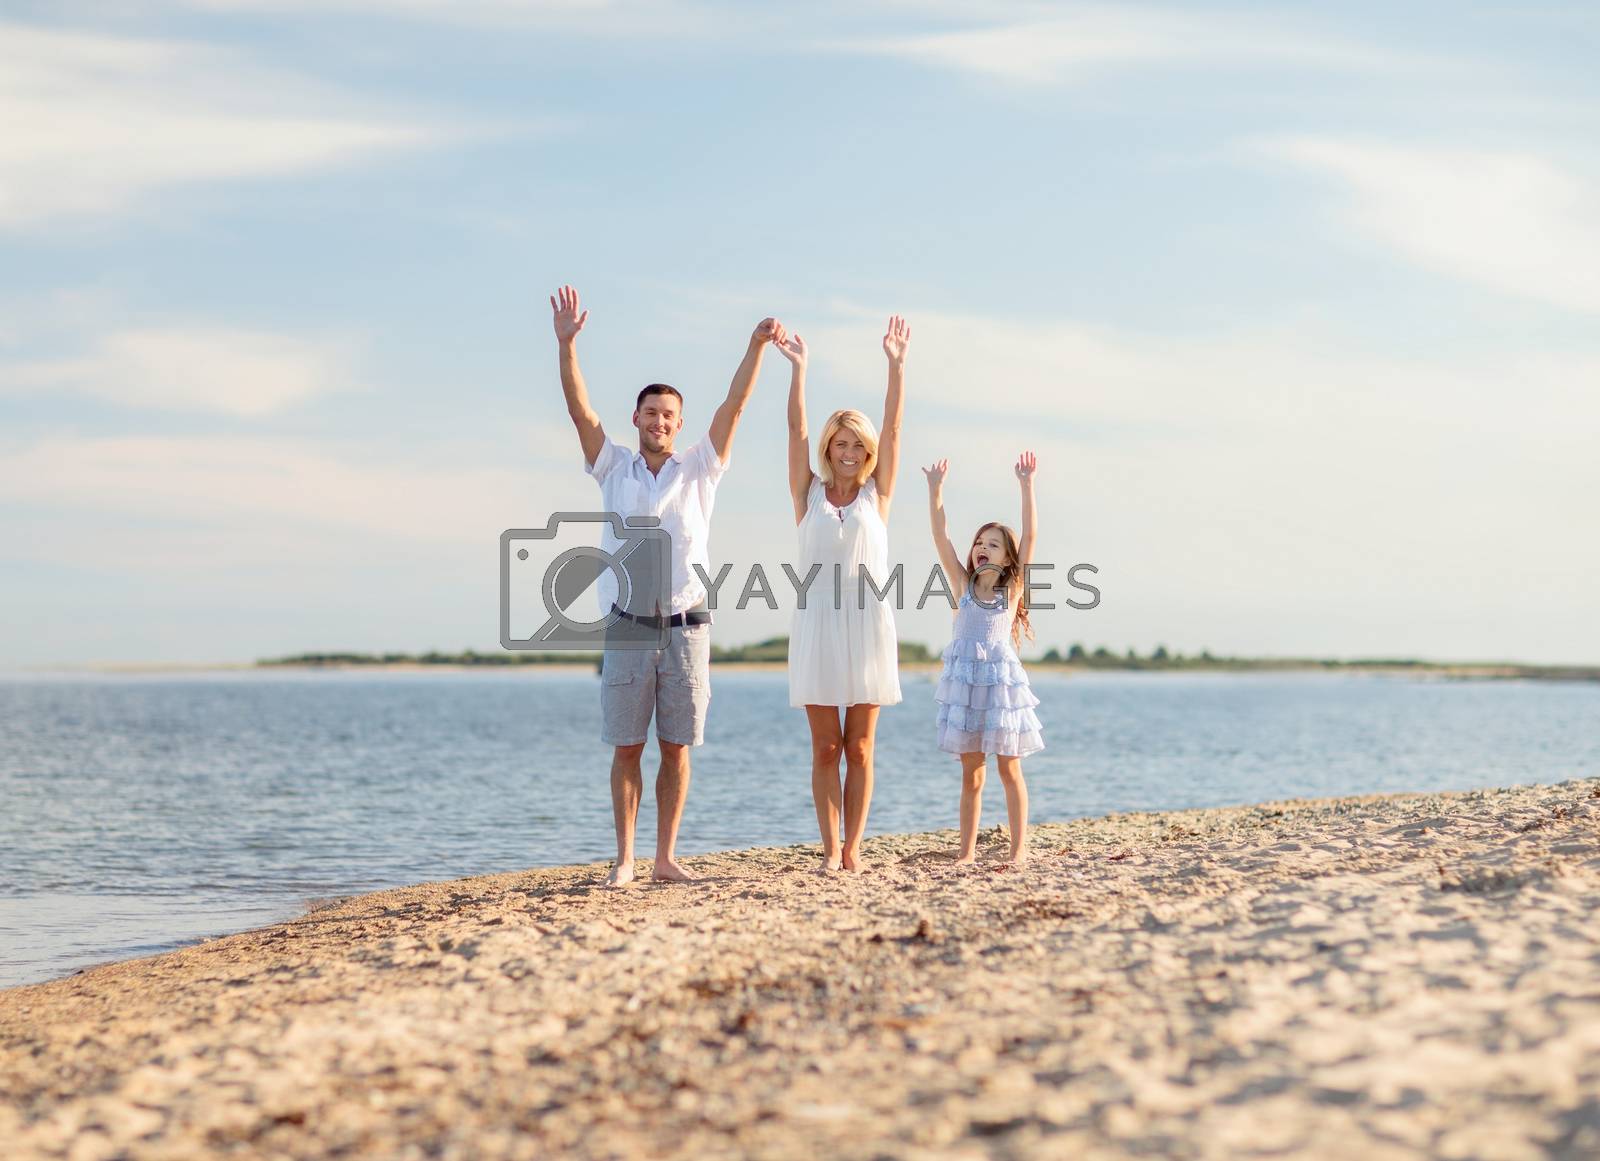 Royalty free image of happy family at the seaside by dolgachov